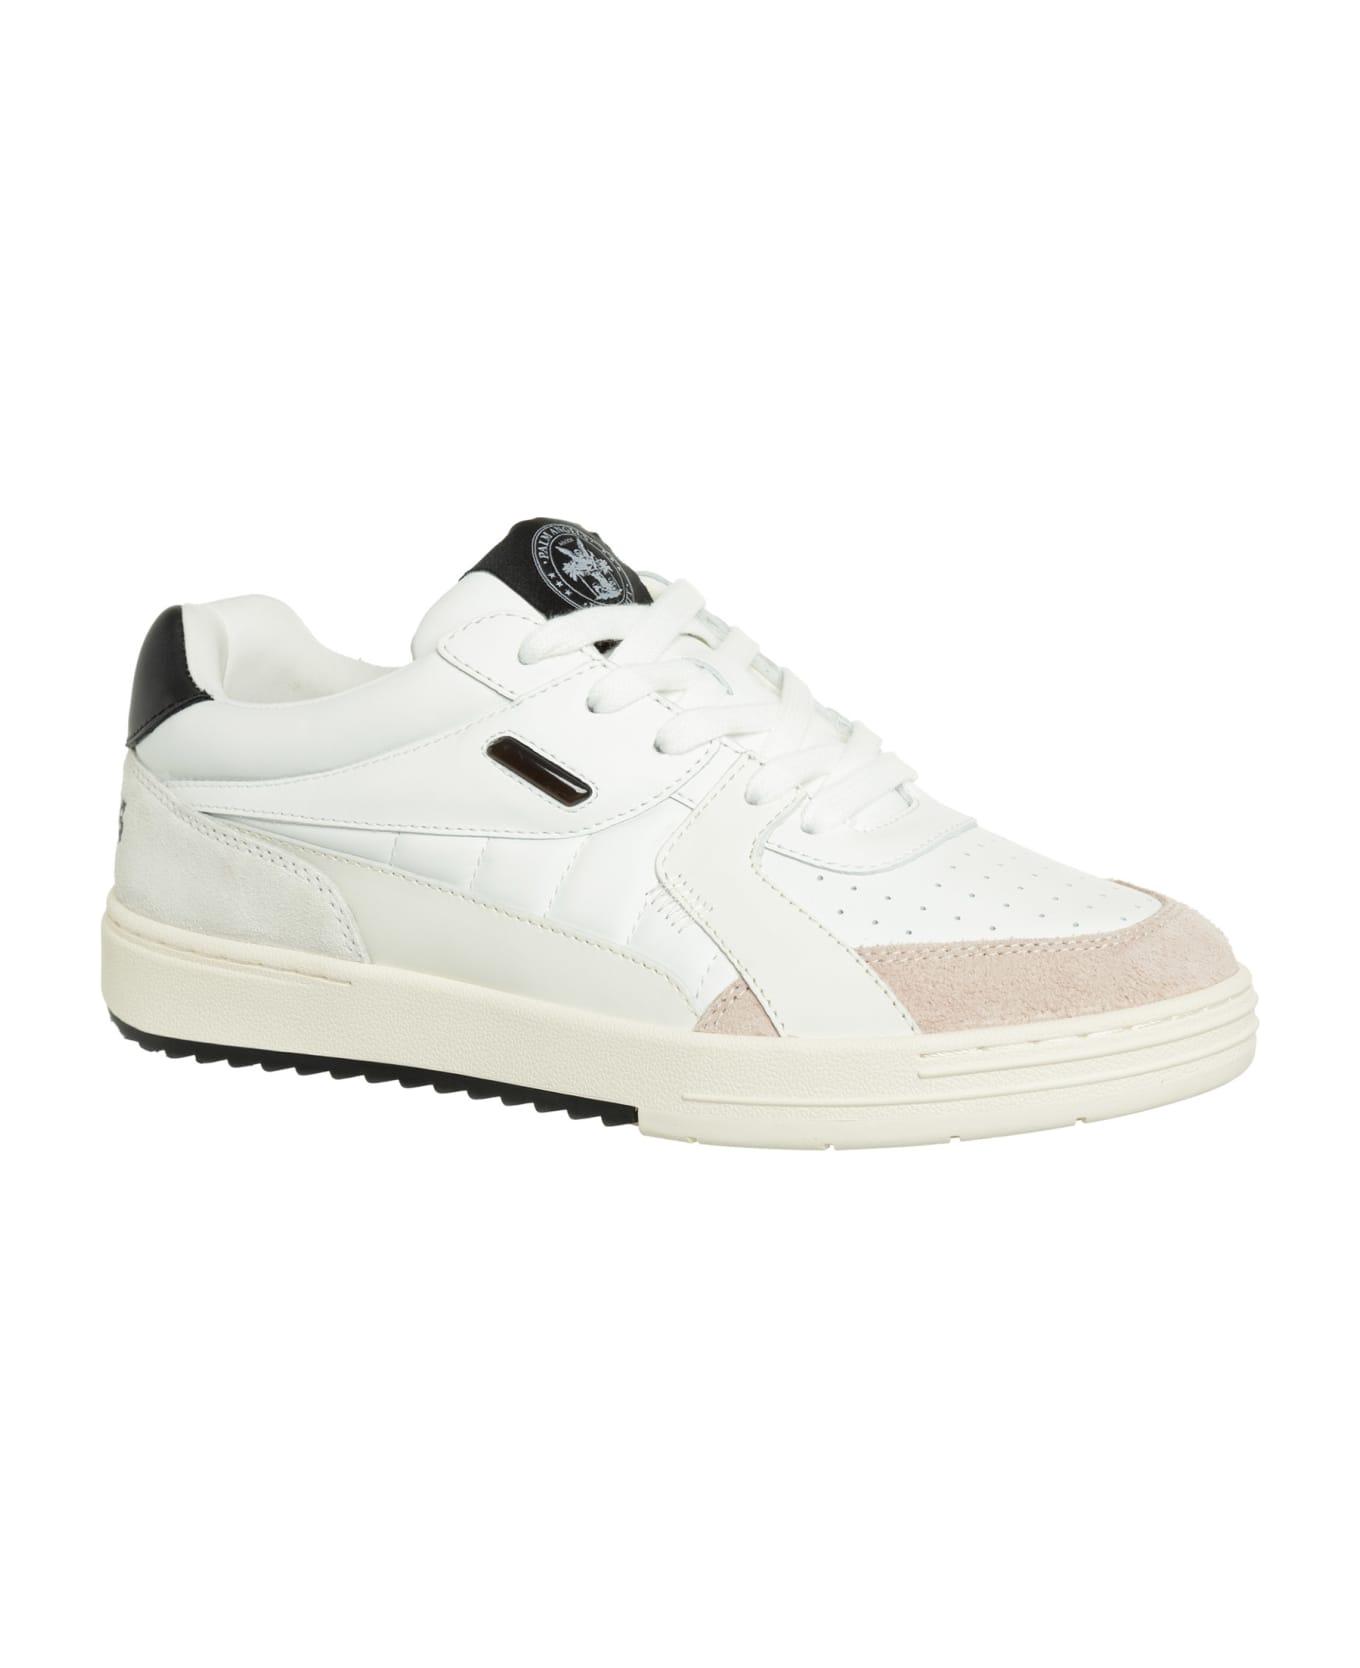 Palm Angels University Leather Sneakers